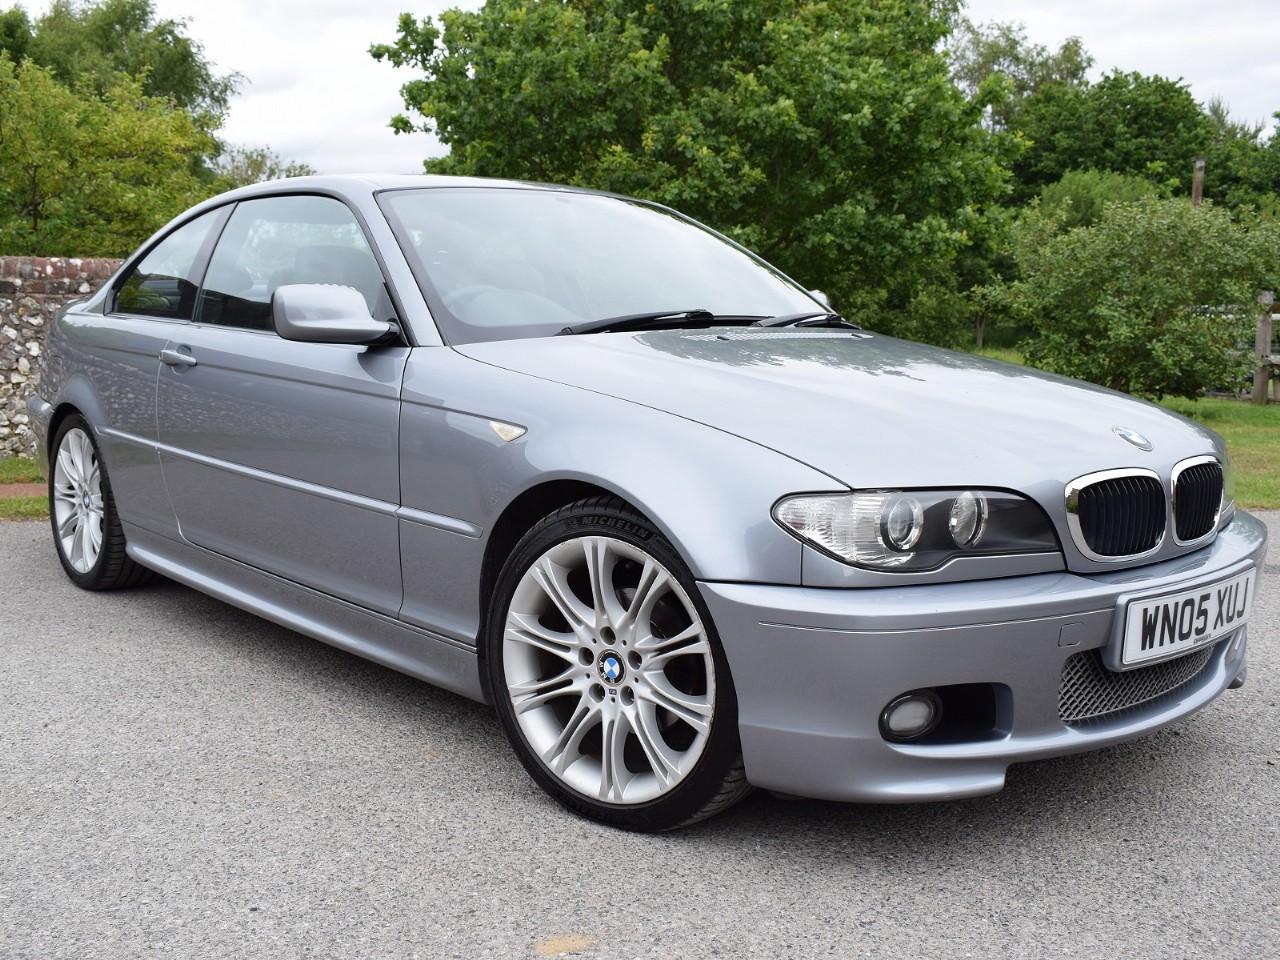 For a BMW 318Ci, the recommended oil capacity